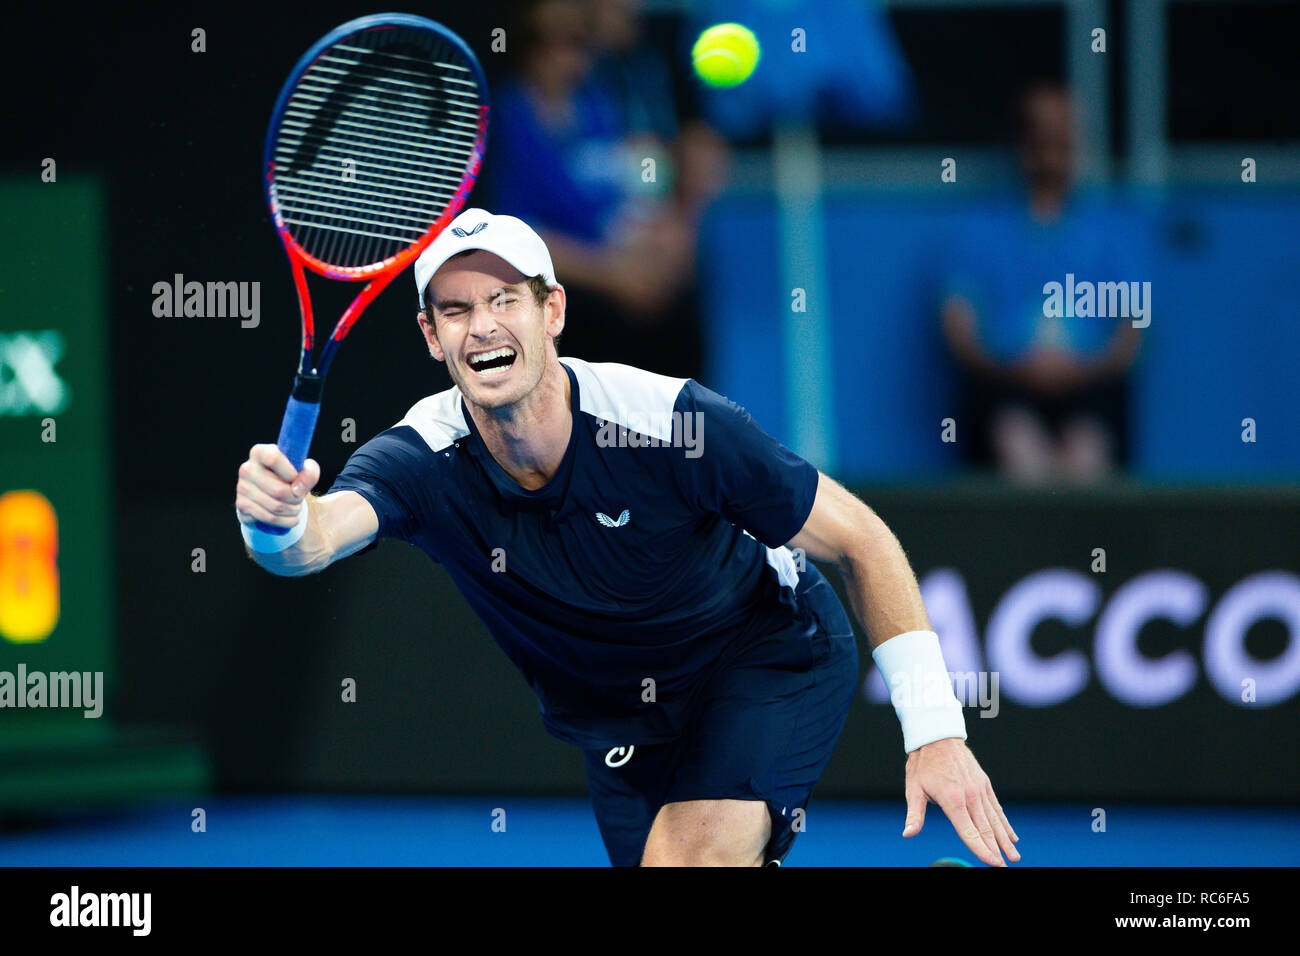 Melbourne, Australia. 14th Jan, 2019. Andy Murray from Great Britain in action during his1st round match at the 2019 Australian Open Grand Slam tennis tournament in Melbourne, Australia. Frank Molter/Alamy Live news Stock Photo